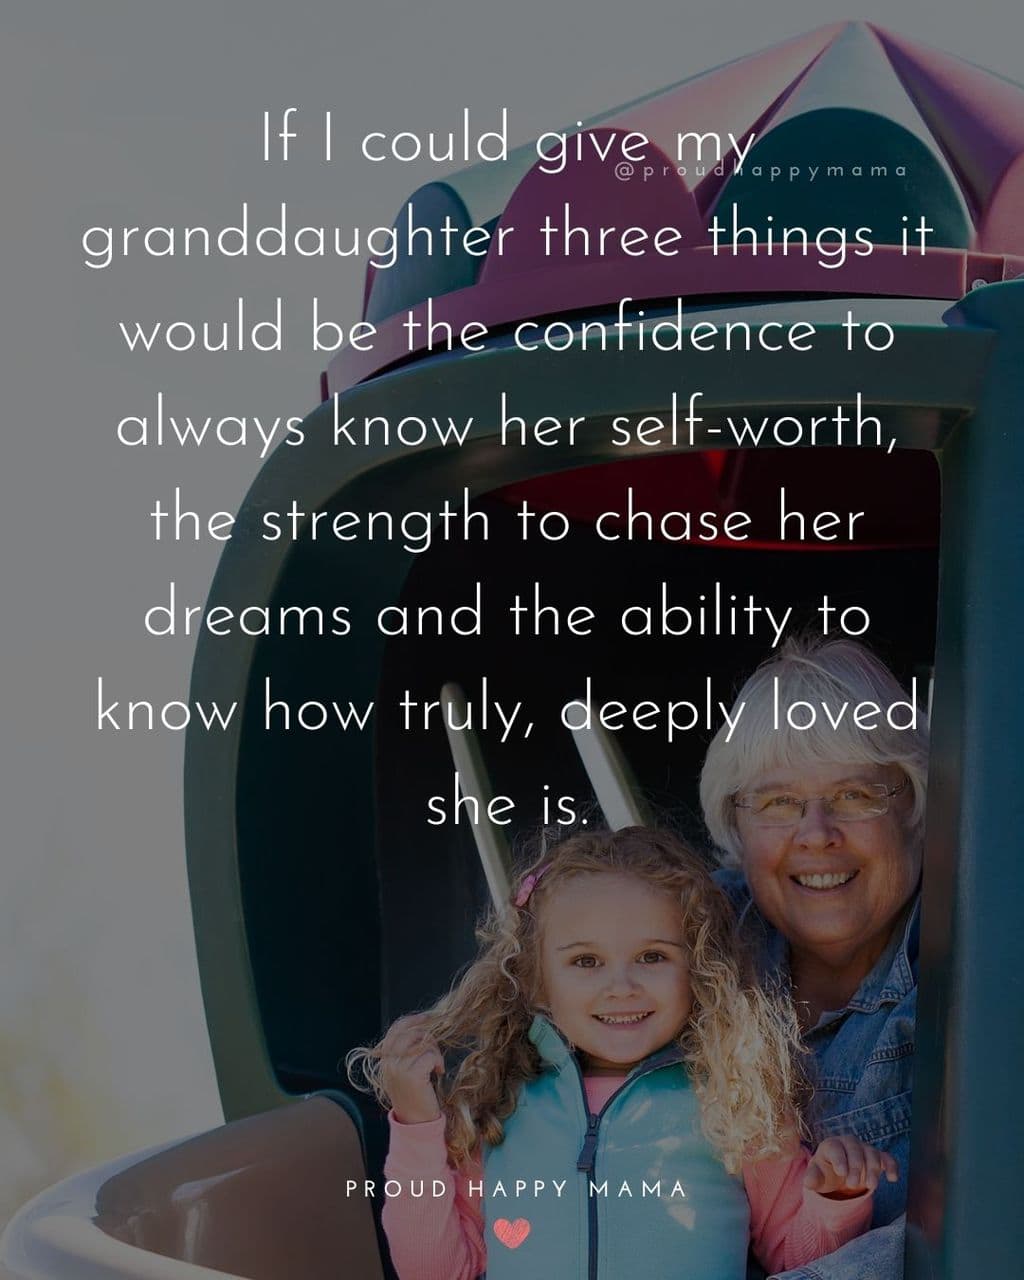 Granddaughter and grandmother sitting at top of a slide smiling with text overlay, ‘If I could give my granddaughter three things it would be the confidence to always know her self-worth, the strength to chase her dreams and the ability to know how truly, deeply loved she is.’